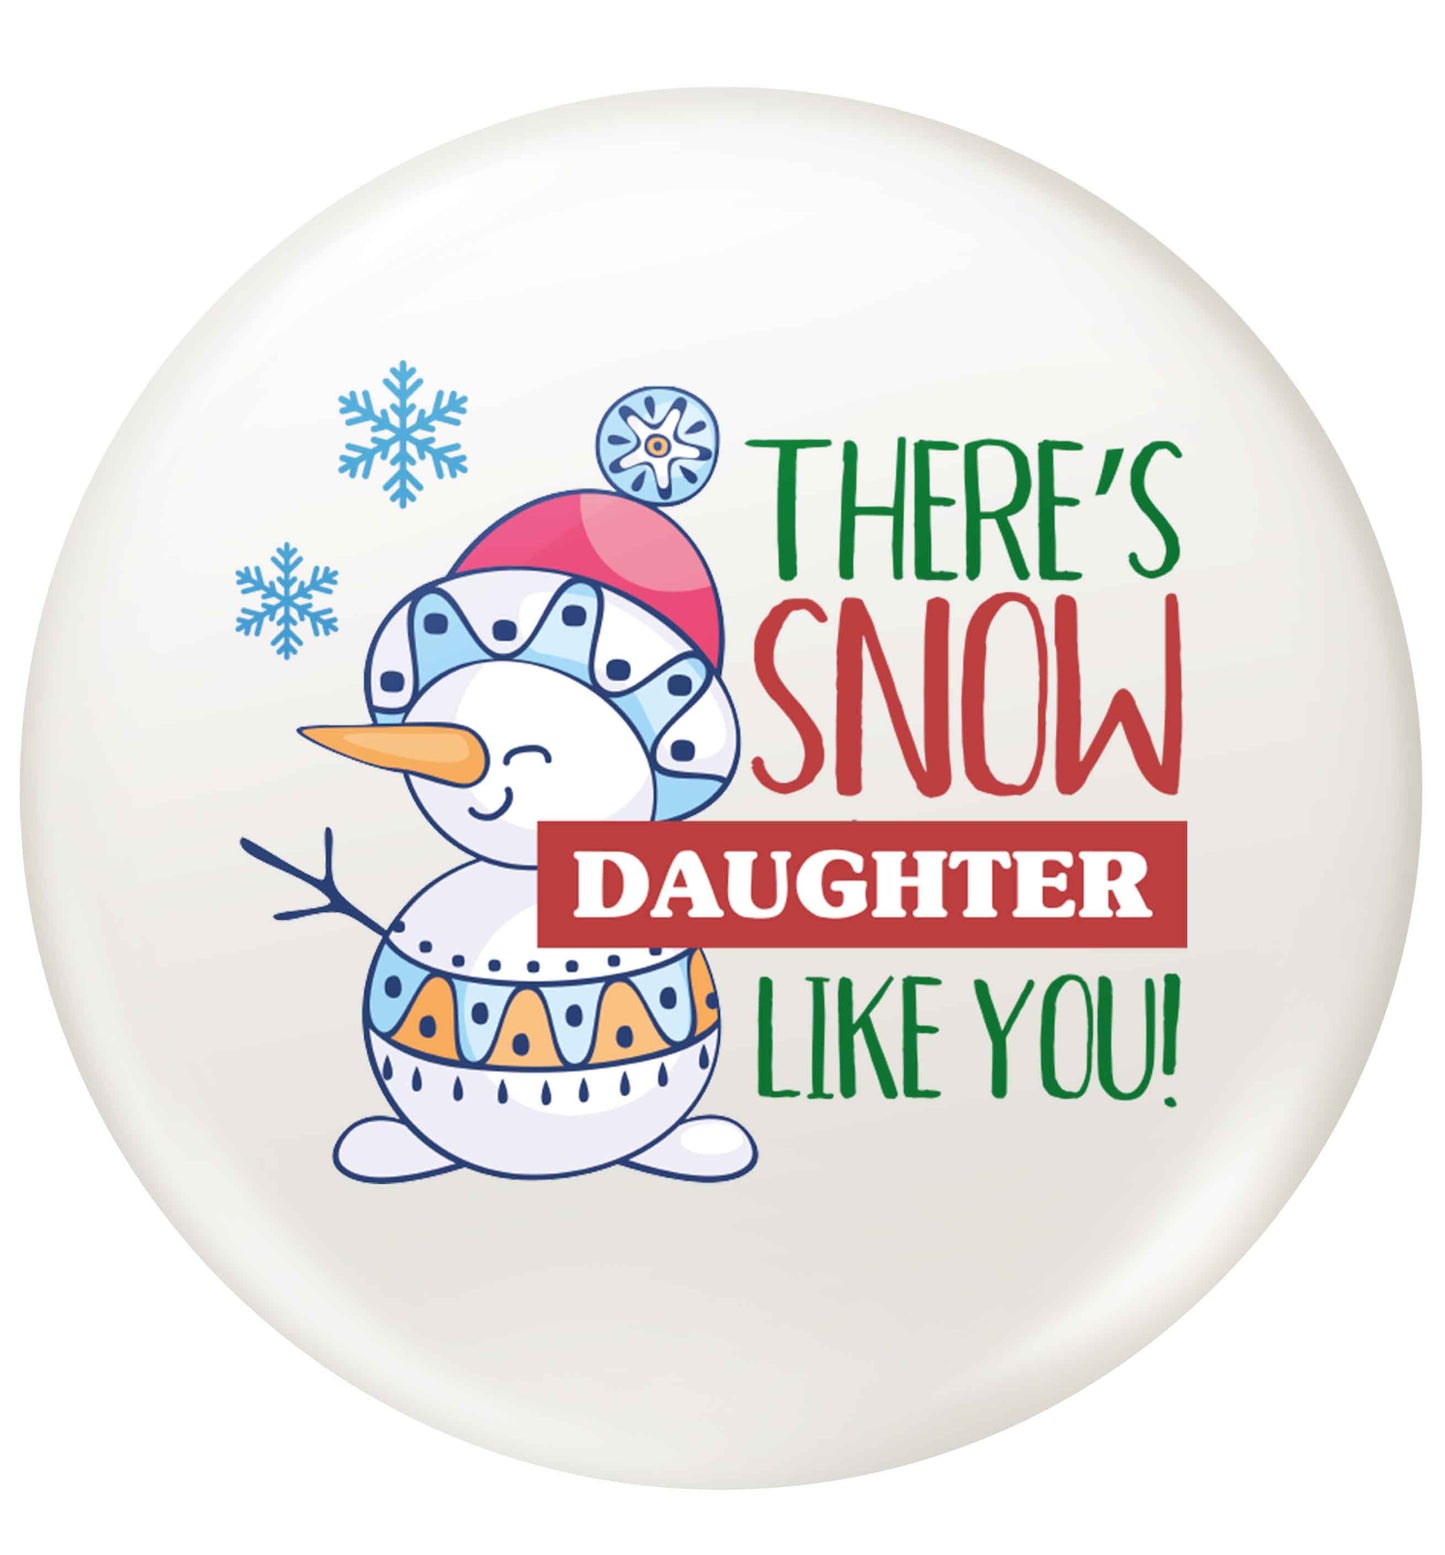 There's snow daughter like you small 25mm Pin badge